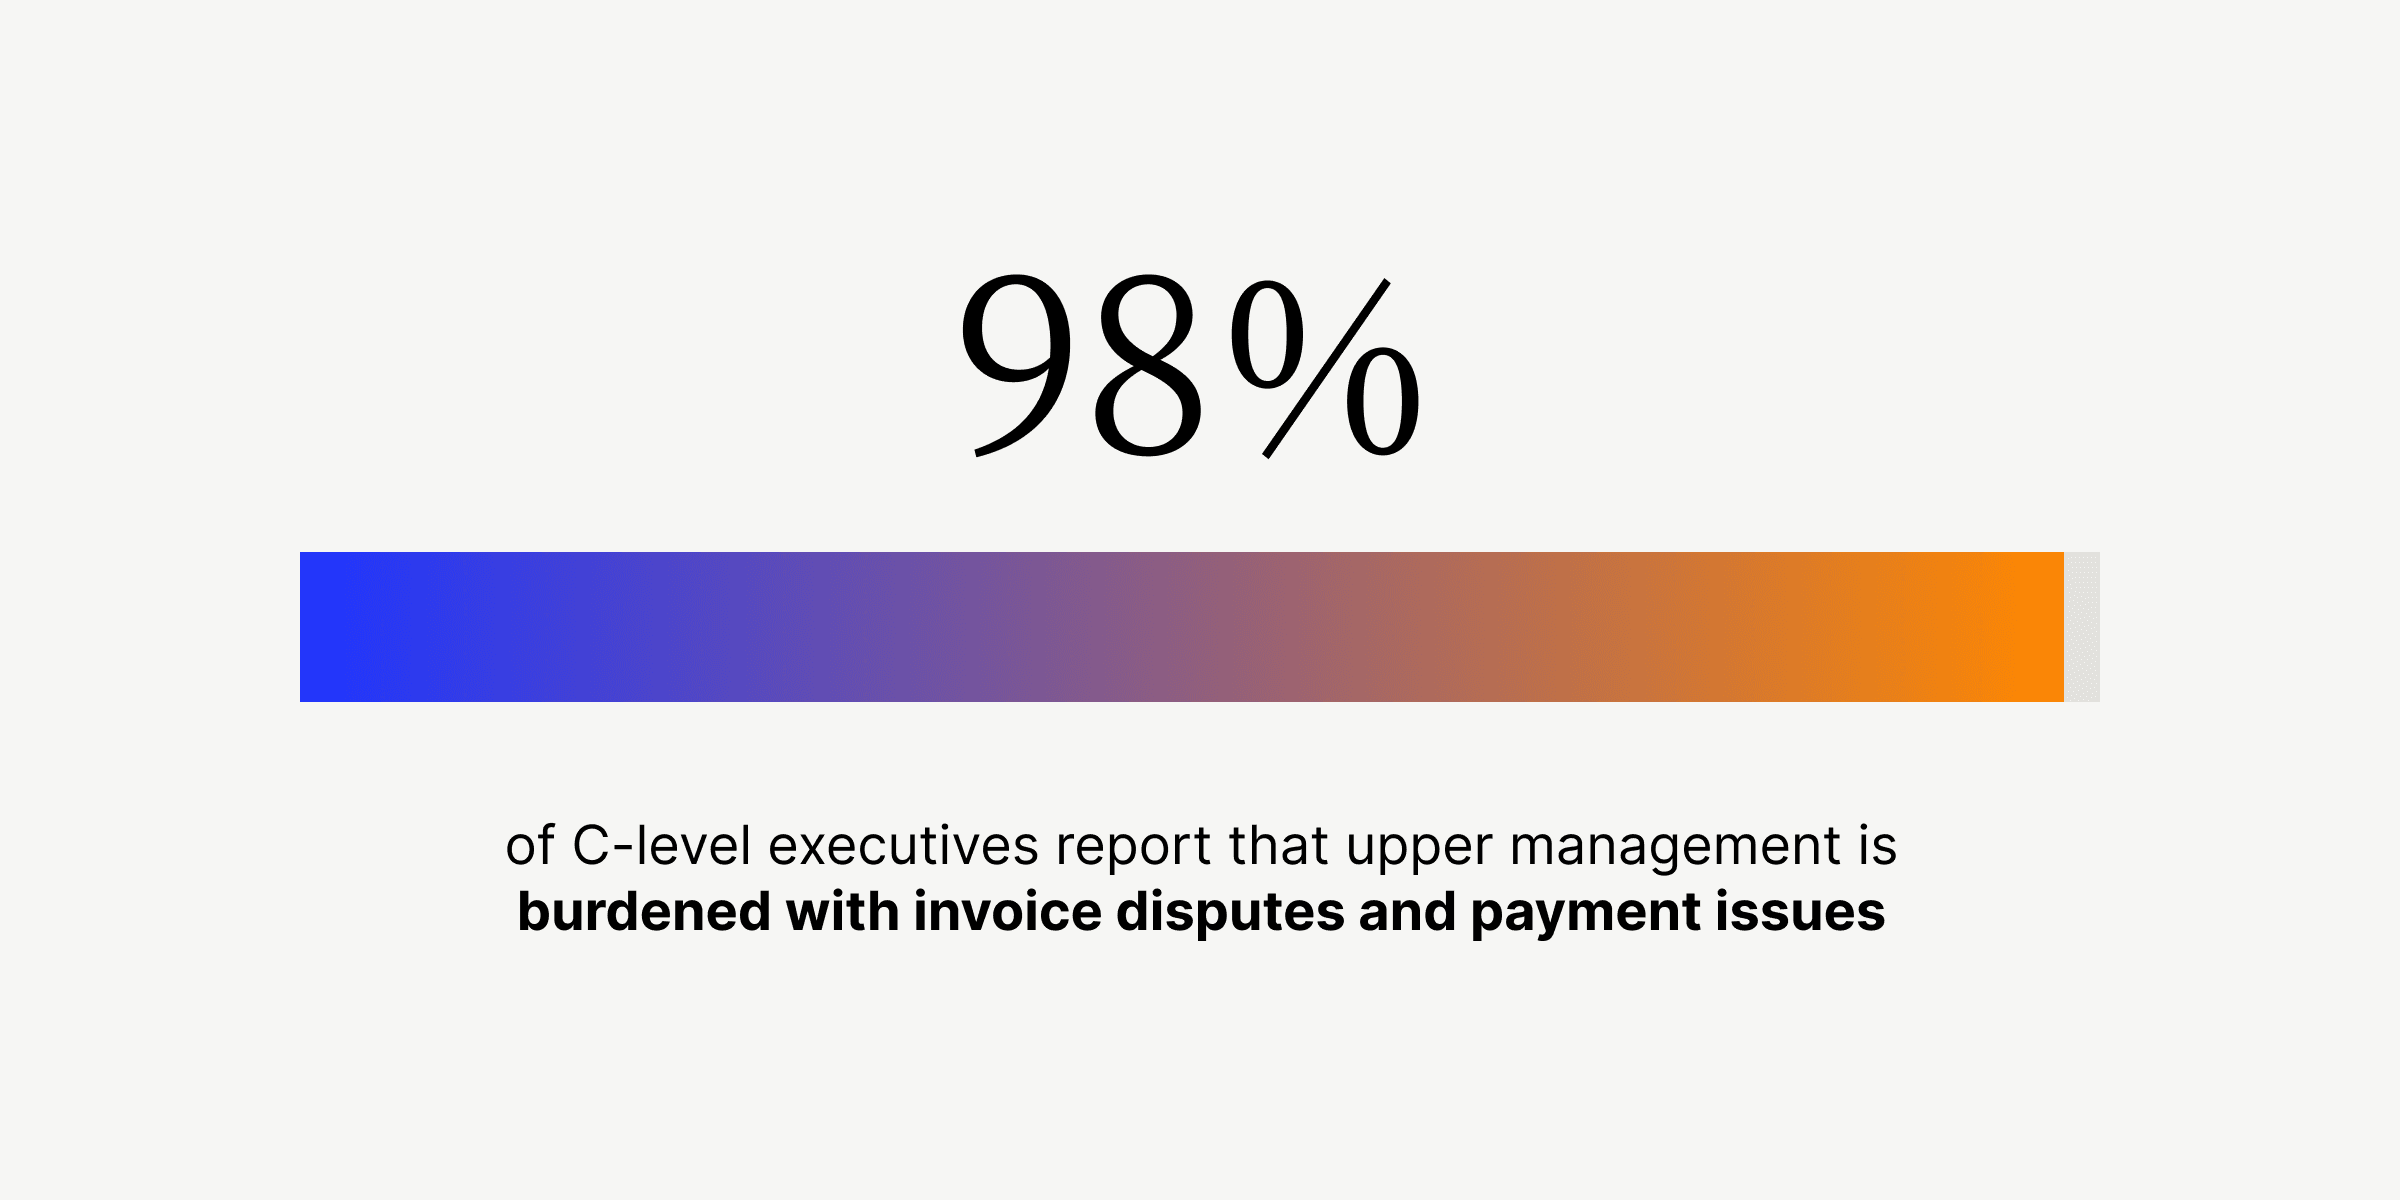 Upper management burdened with invoice disputes and payment issues